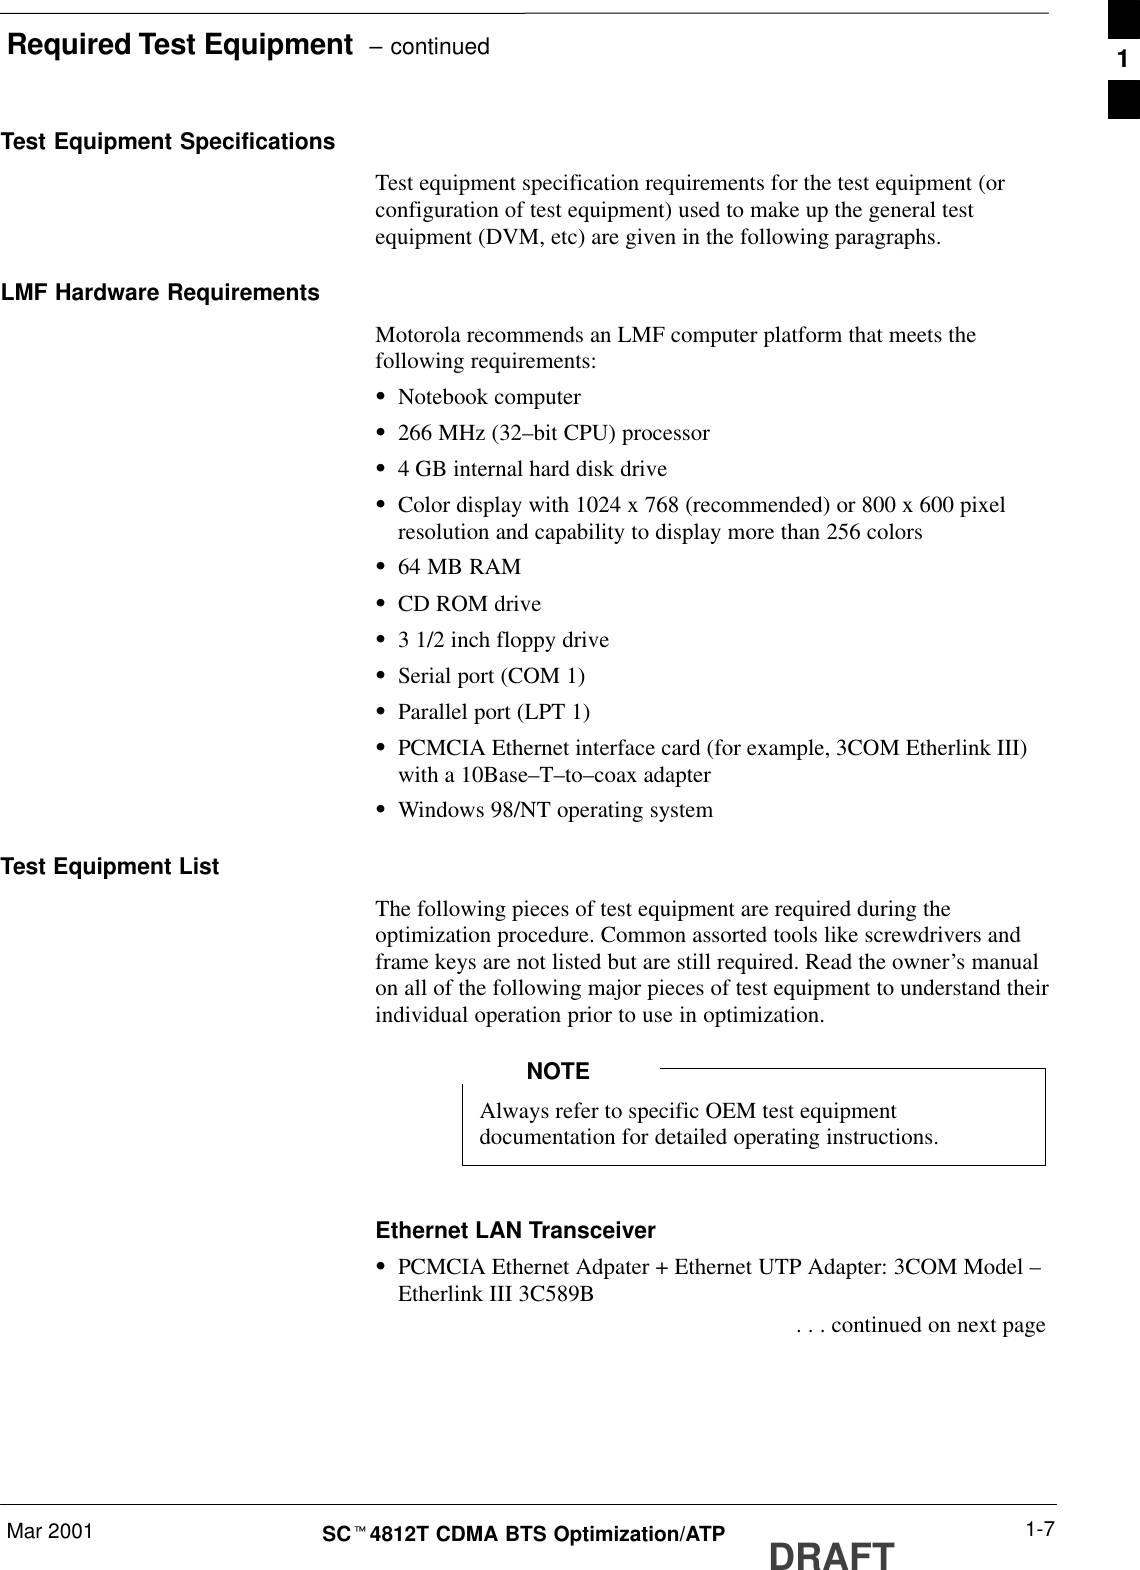 Required Test Equipment  – continuedMar 2001 1-7SCt4812T CDMA BTS Optimization/ATP DRAFTTest Equipment SpecificationsTest equipment specification requirements for the test equipment (orconfiguration of test equipment) used to make up the general testequipment (DVM, etc) are given in the following paragraphs.LMF Hardware RequirementsMotorola recommends an LMF computer platform that meets thefollowing requirements:SNotebook computerS266 MHz (32–bit CPU) processorS4 GB internal hard disk driveSColor display with 1024 x 768 (recommended) or 800 x 600 pixelresolution and capability to display more than 256 colorsS64 MB RAMSCD ROM driveS3 1/2 inch floppy driveSSerial port (COM 1)SParallel port (LPT 1)SPCMCIA Ethernet interface card (for example, 3COM Etherlink III)with a 10Base–T–to–coax adapterSWindows 98/NT operating systemTest Equipment ListThe following pieces of test equipment are required during theoptimization procedure. Common assorted tools like screwdrivers andframe keys are not listed but are still required. Read the owner’s manualon all of the following major pieces of test equipment to understand theirindividual operation prior to use in optimization.Always refer to specific OEM test equipmentdocumentation for detailed operating instructions.NOTEEthernet LAN TransceiverSPCMCIA Ethernet Adpater + Ethernet UTP Adapter: 3COM Model –Etherlink III 3C589B . . . continued on next page1